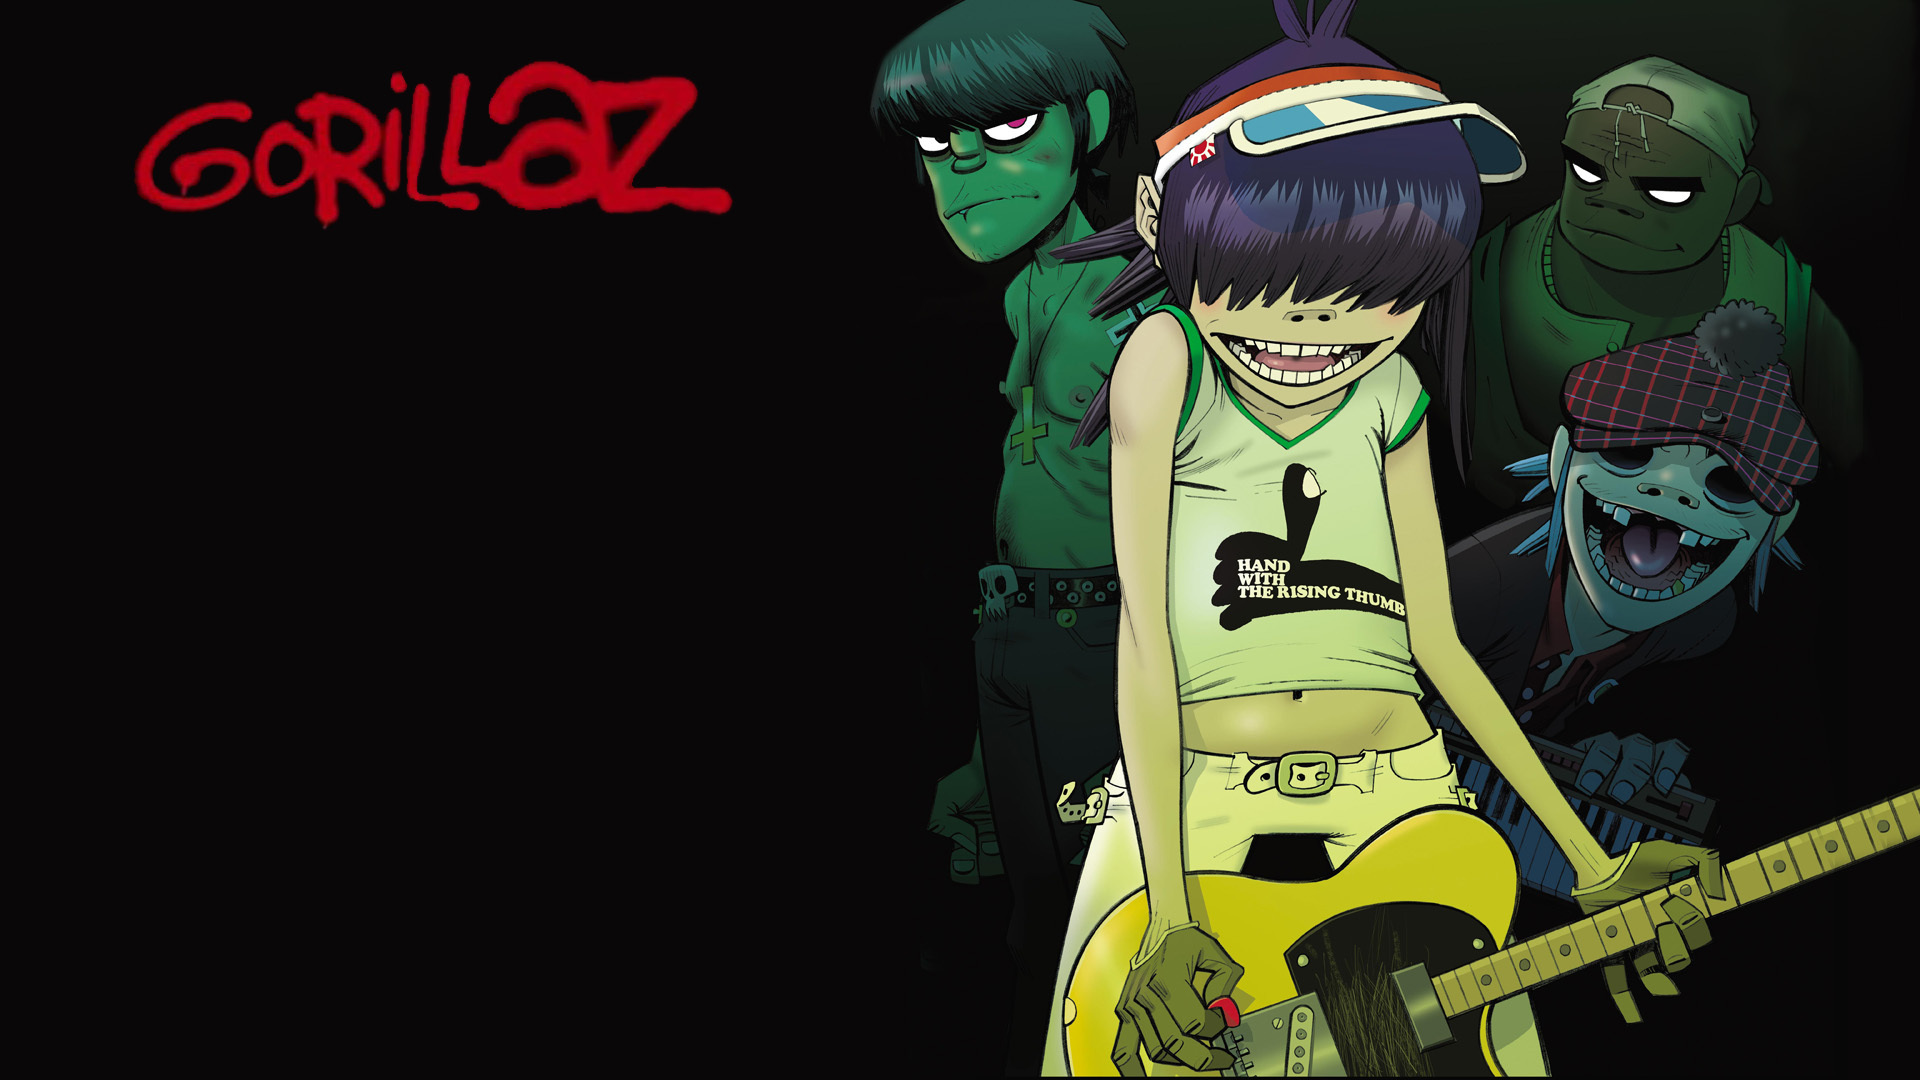 Gorillaz Image HD Wallpaper And Background